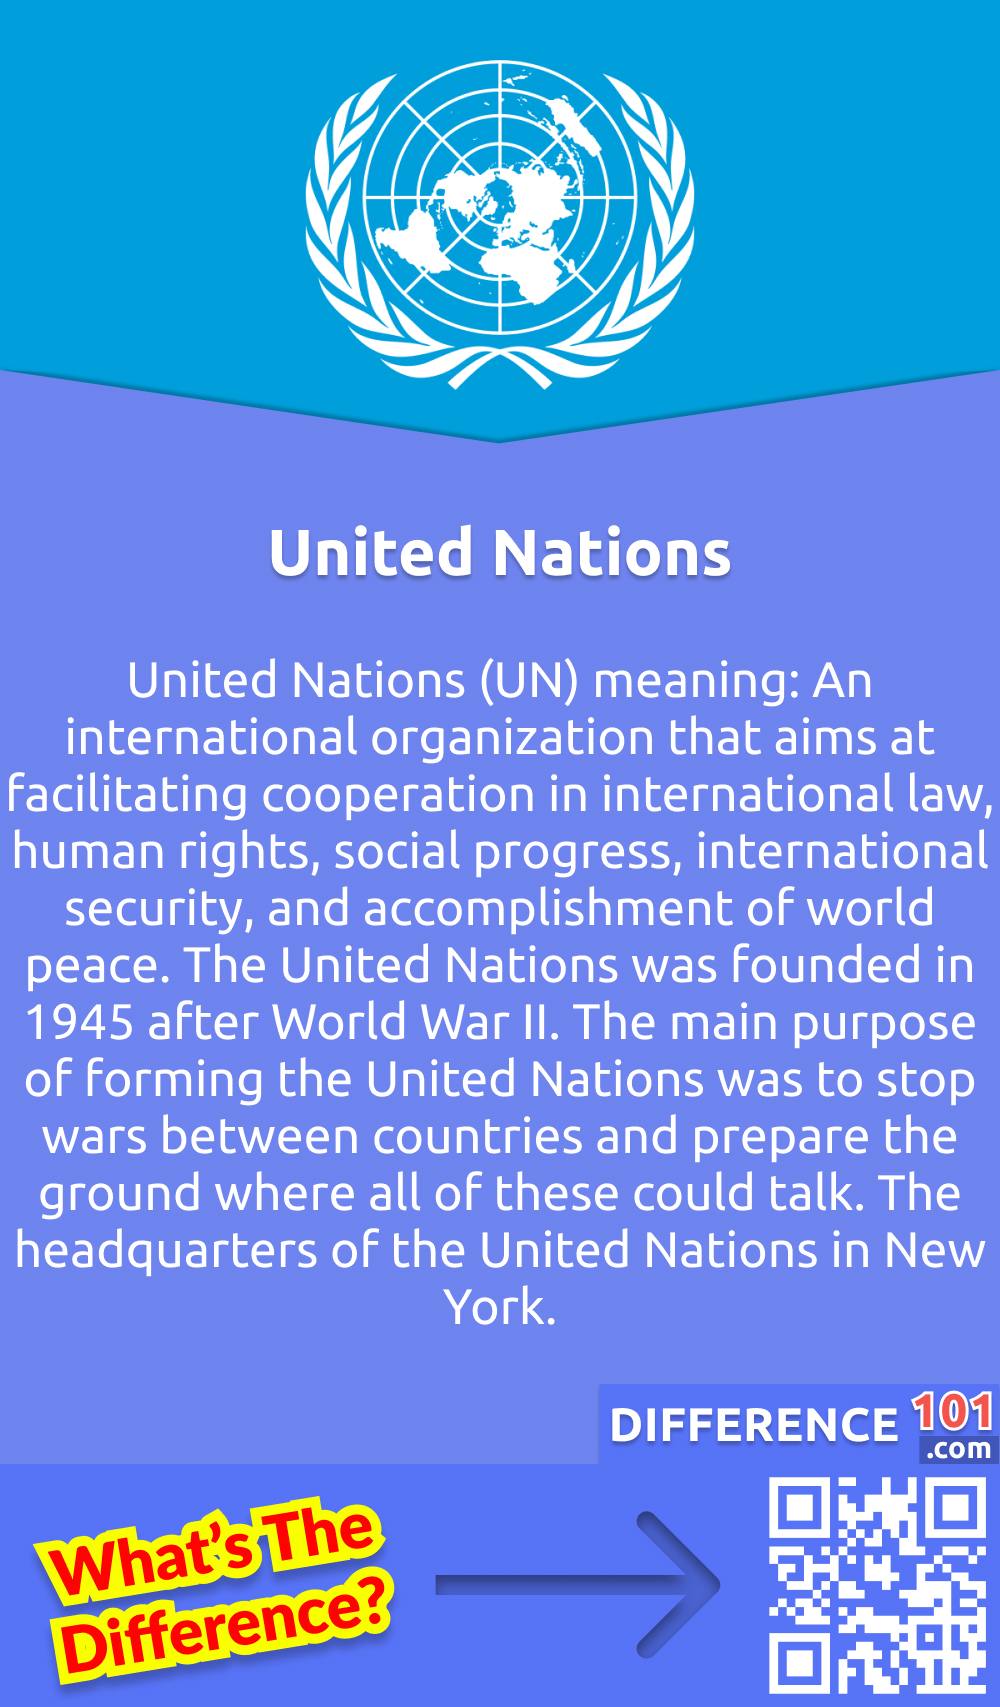 What Is The United Nations? United Nations (UN) meaning: An international organization that aims at facilitating cooperation in international law, human rights, social progress, international security, and accomplishment of world peace. The United Nations was founded in 1945 after World War II. The main purpose of forming the United Nations was to stop wars between countries and prepare the ground where all of these could talk. The headquarters of the United Nations in New York. There are various languages included by the United Nations, including French, English, Spanish and Chinese. There are five main bodies on which the Union Nations work: the General Assembly, the Security Council, the Economic and Social Council, the UN Secretary-General, and the International Court of Justice.